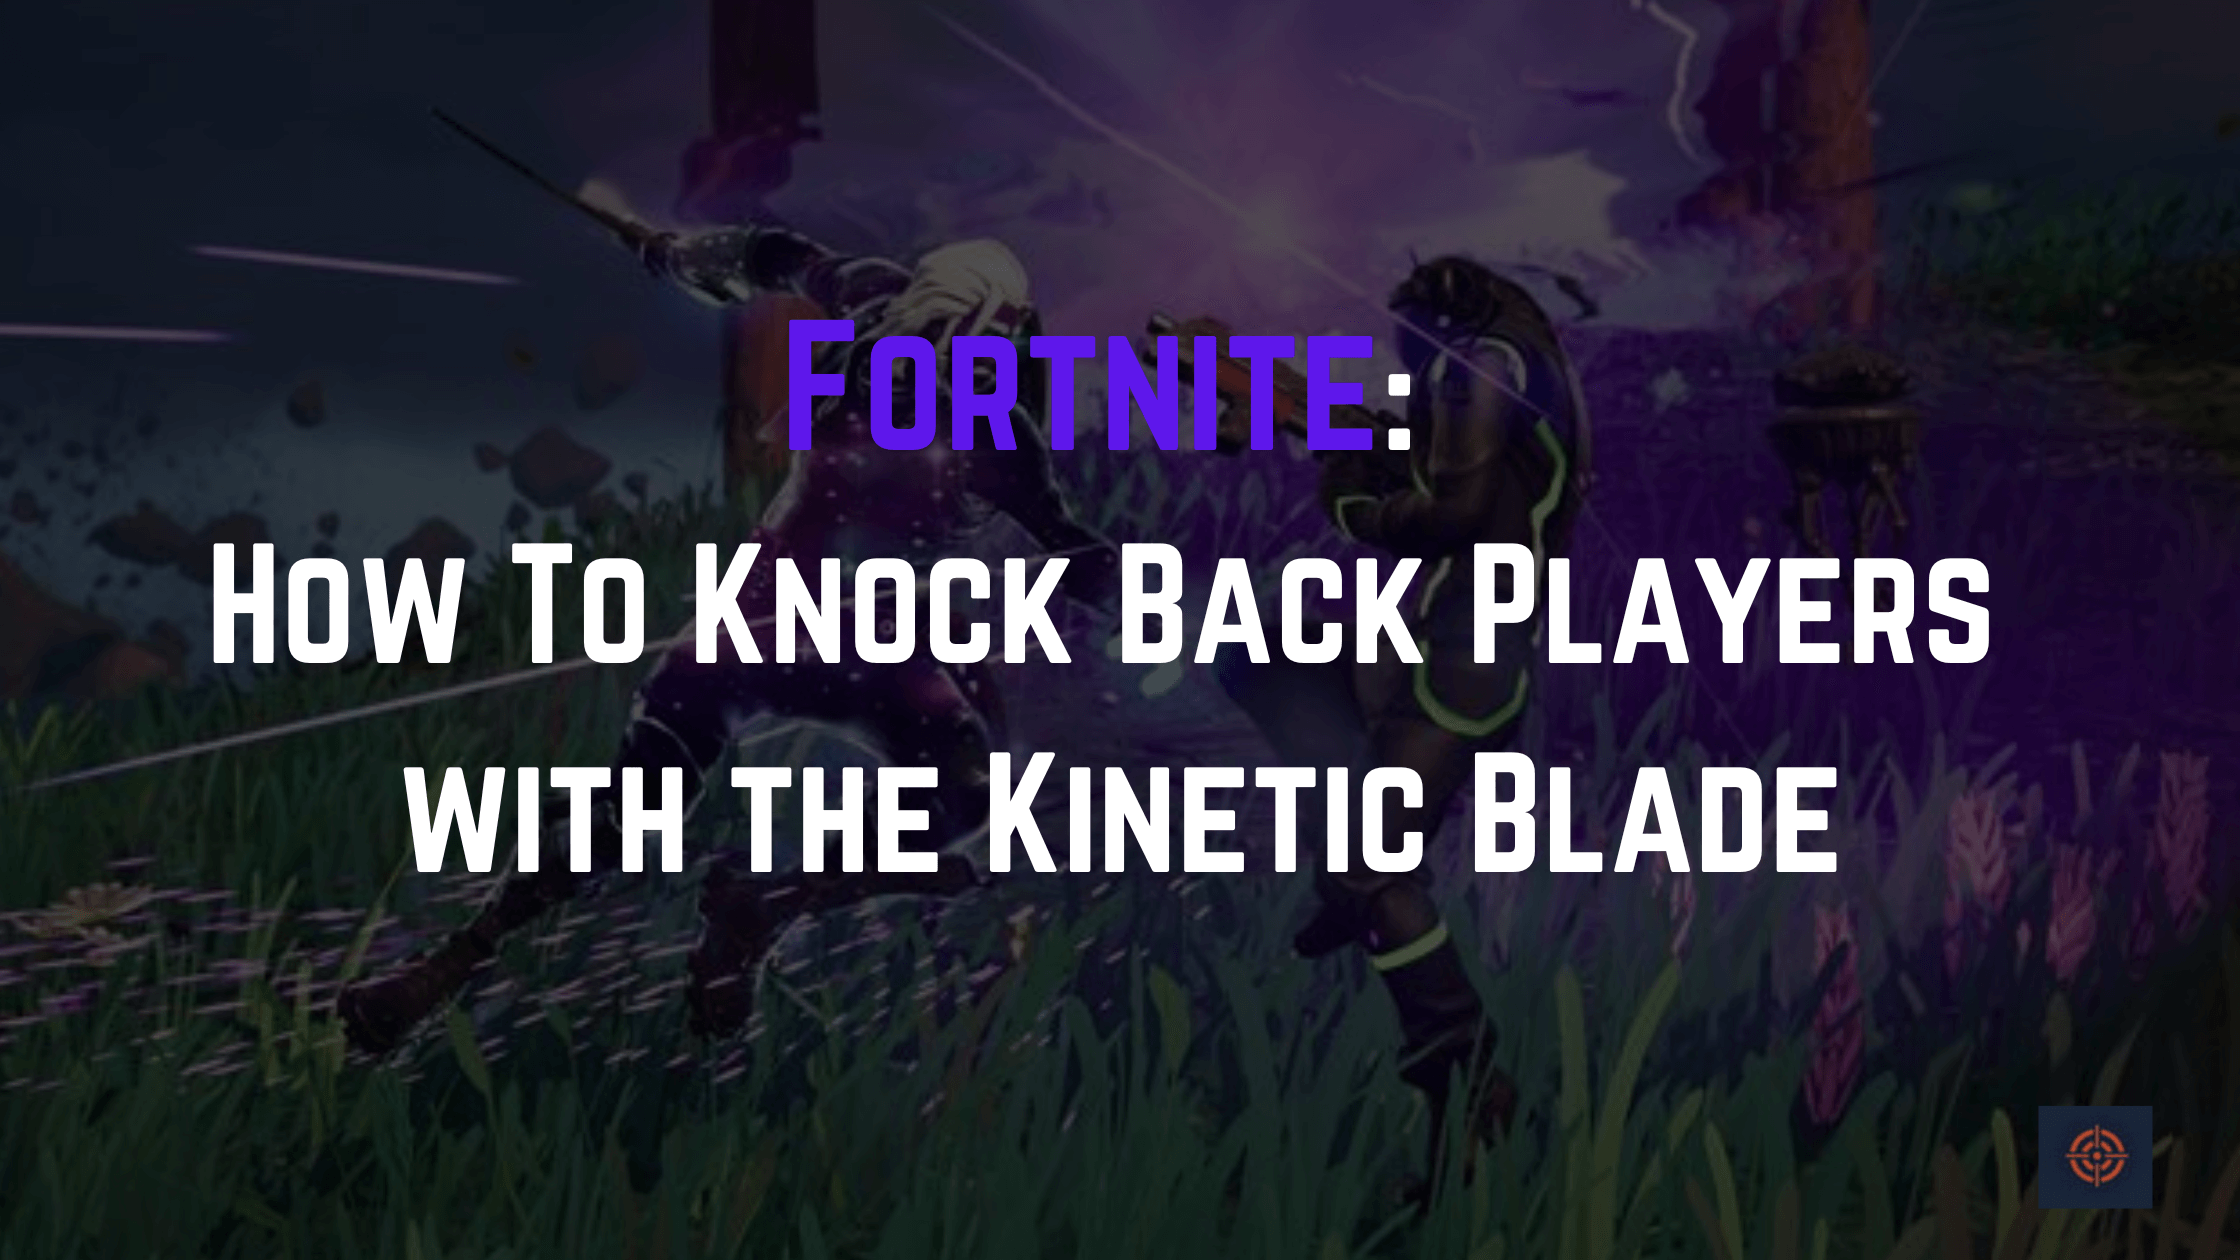 How to knock back players with Kinetic Blade